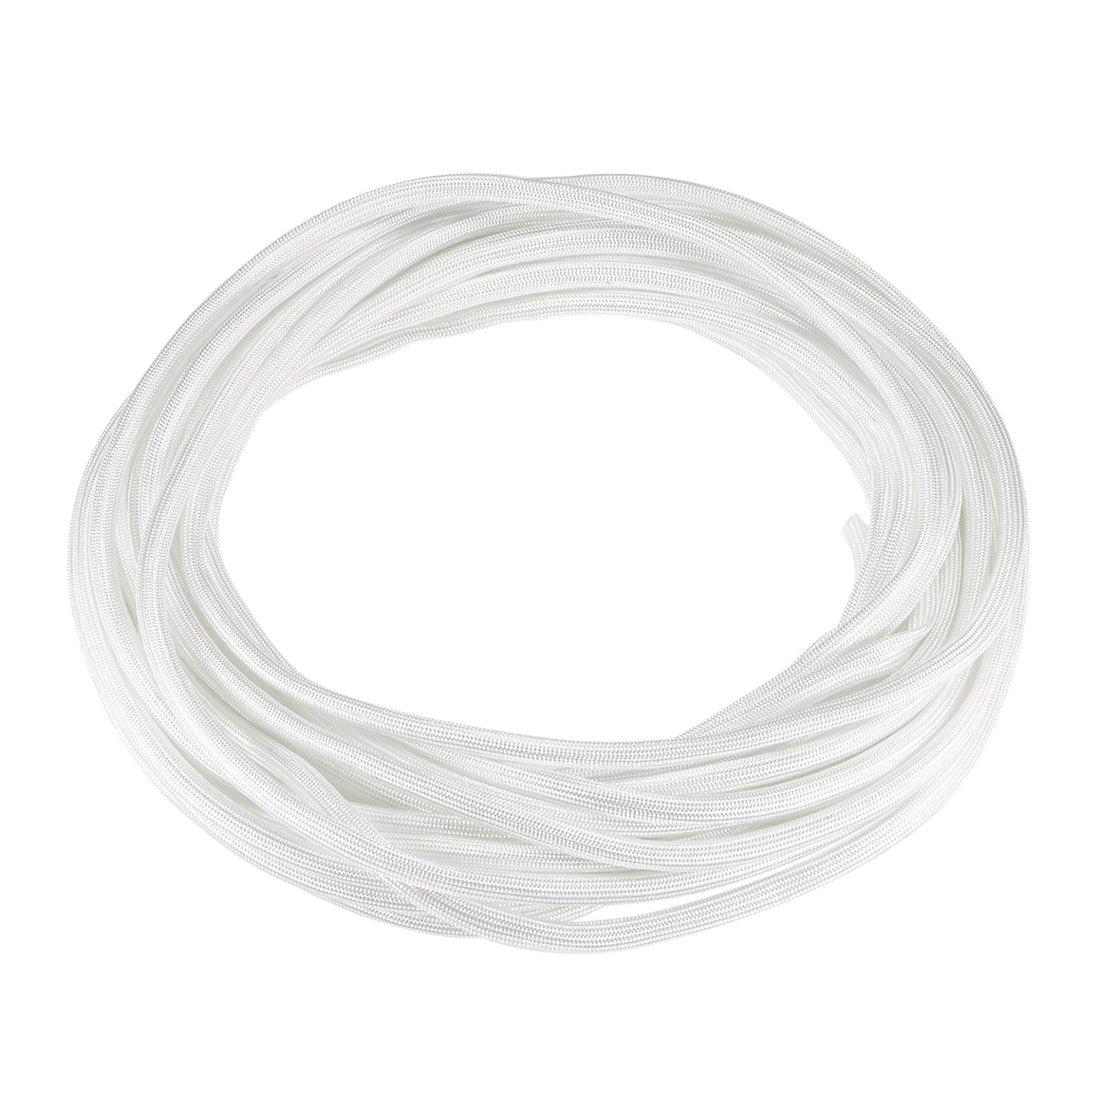 uxcell Uxcell Silicone Rubber Fiberglass Insulation Retardant Self-extinguishing Sleeving 5mmx10M RoHS White